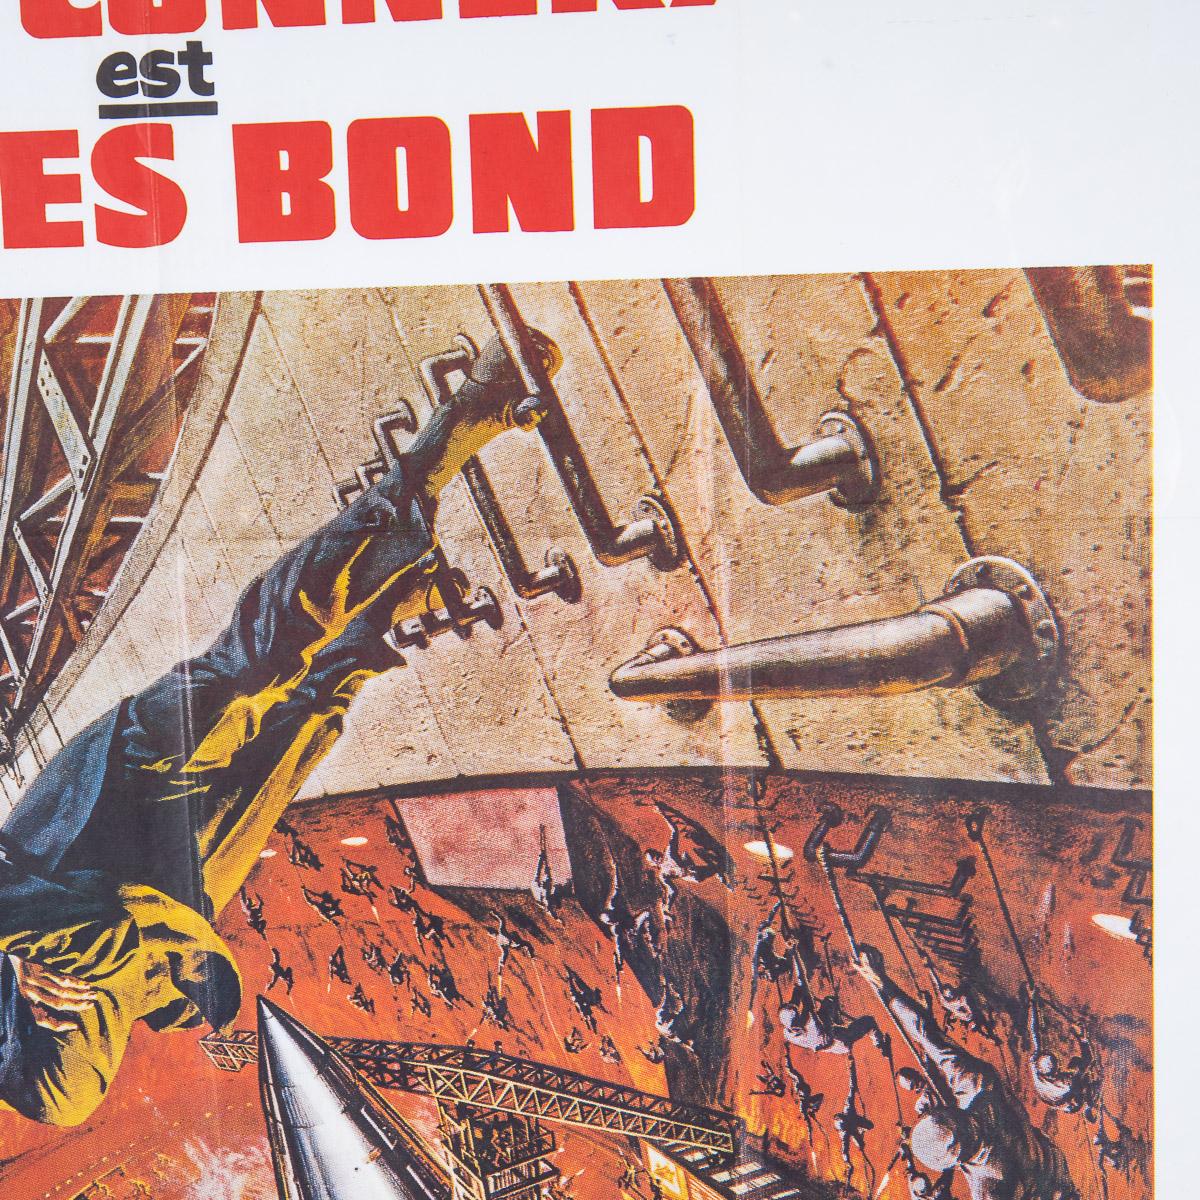 20th Century Original French Re-Release James Bond 007 'You Only Live Twice' Poster, c.1980 For Sale